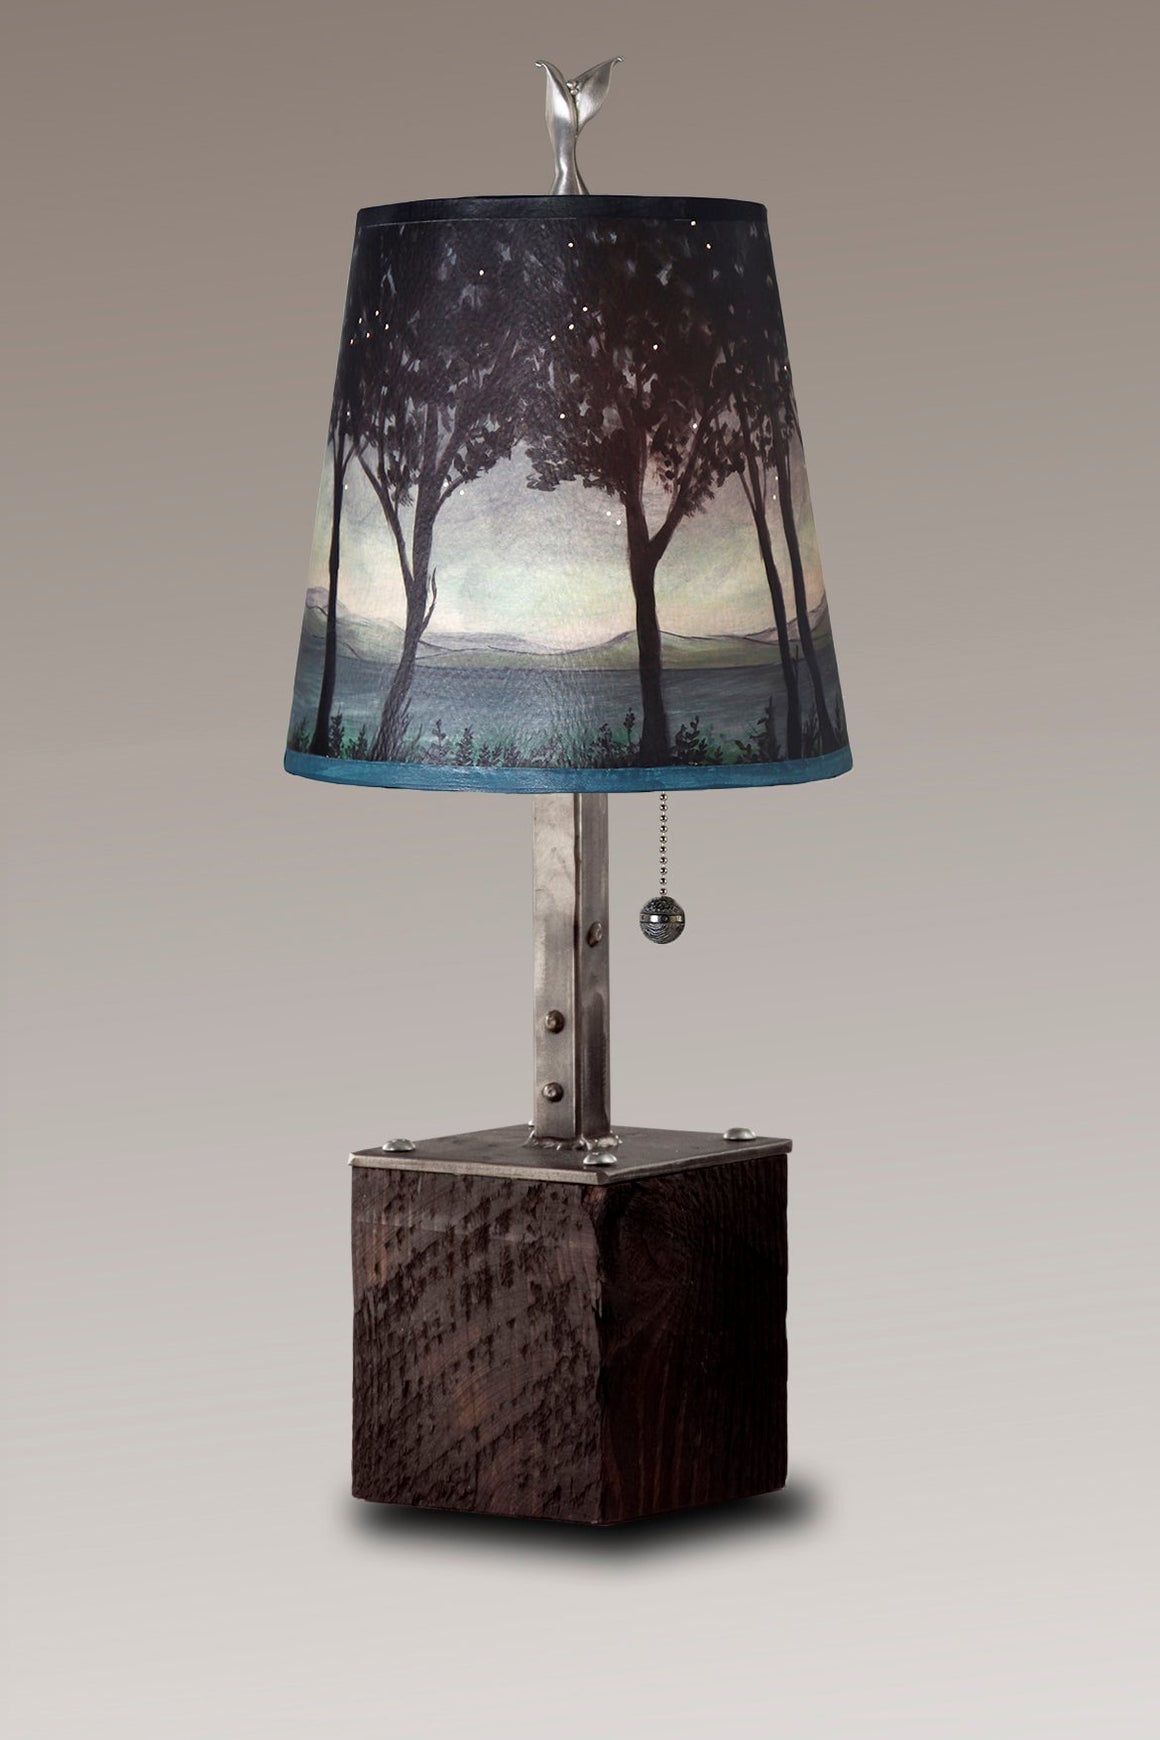 Steel Table Lamp on Reclaimed Wood with Small Drum Shade in Twilight